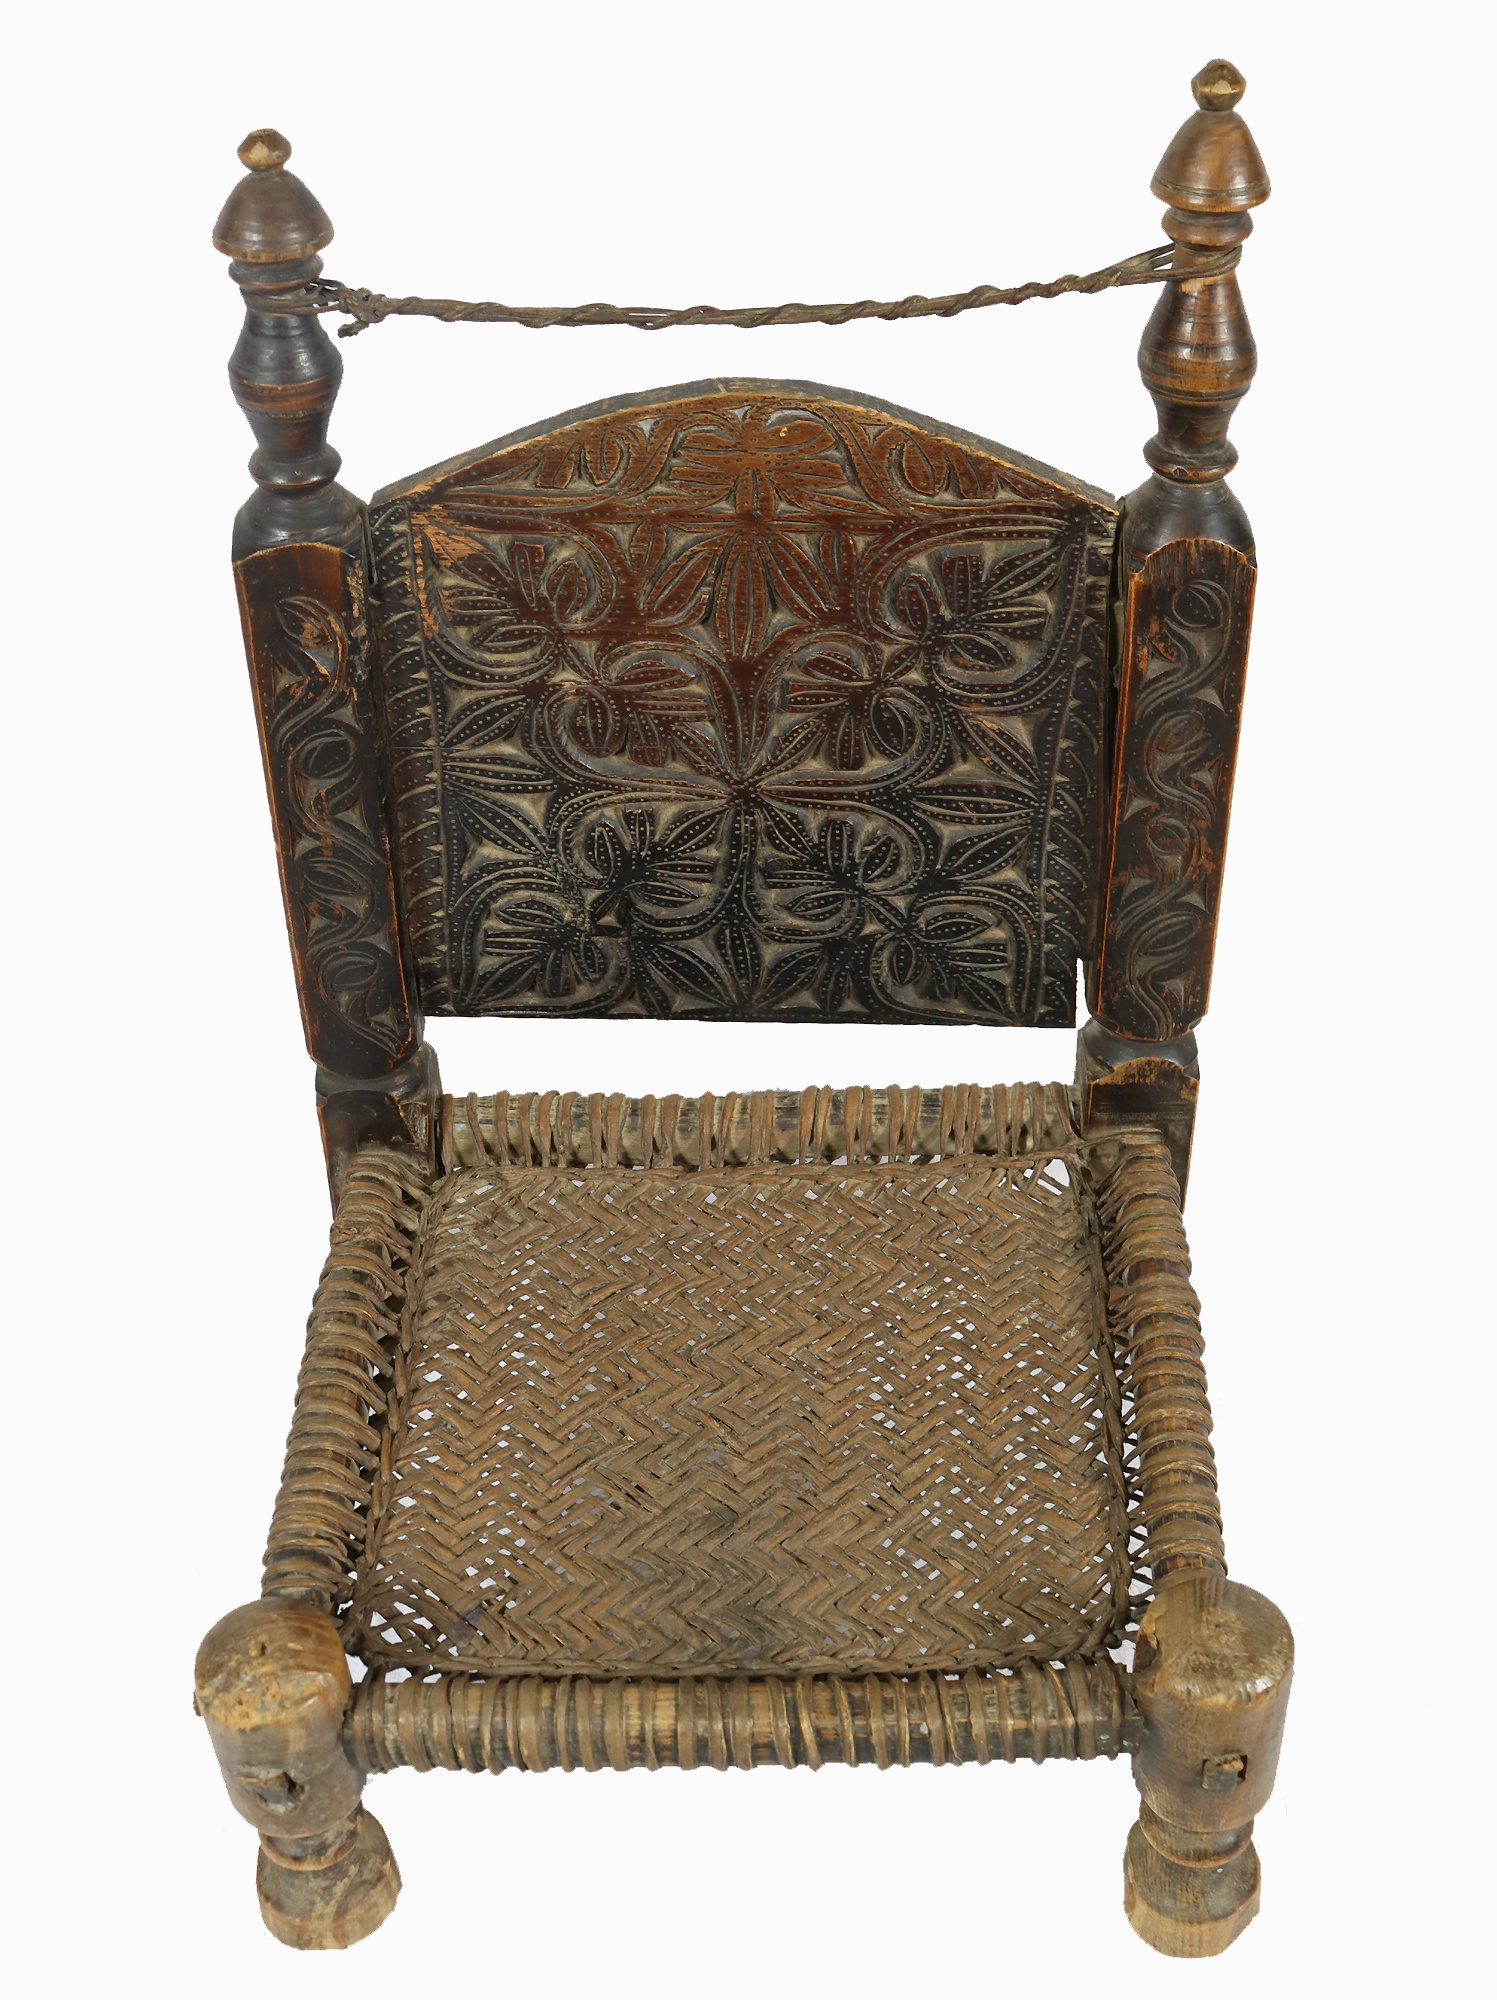 antiquity chair from Nuristan Afghanistan / Swat-valley Pakistan No: ULM-A